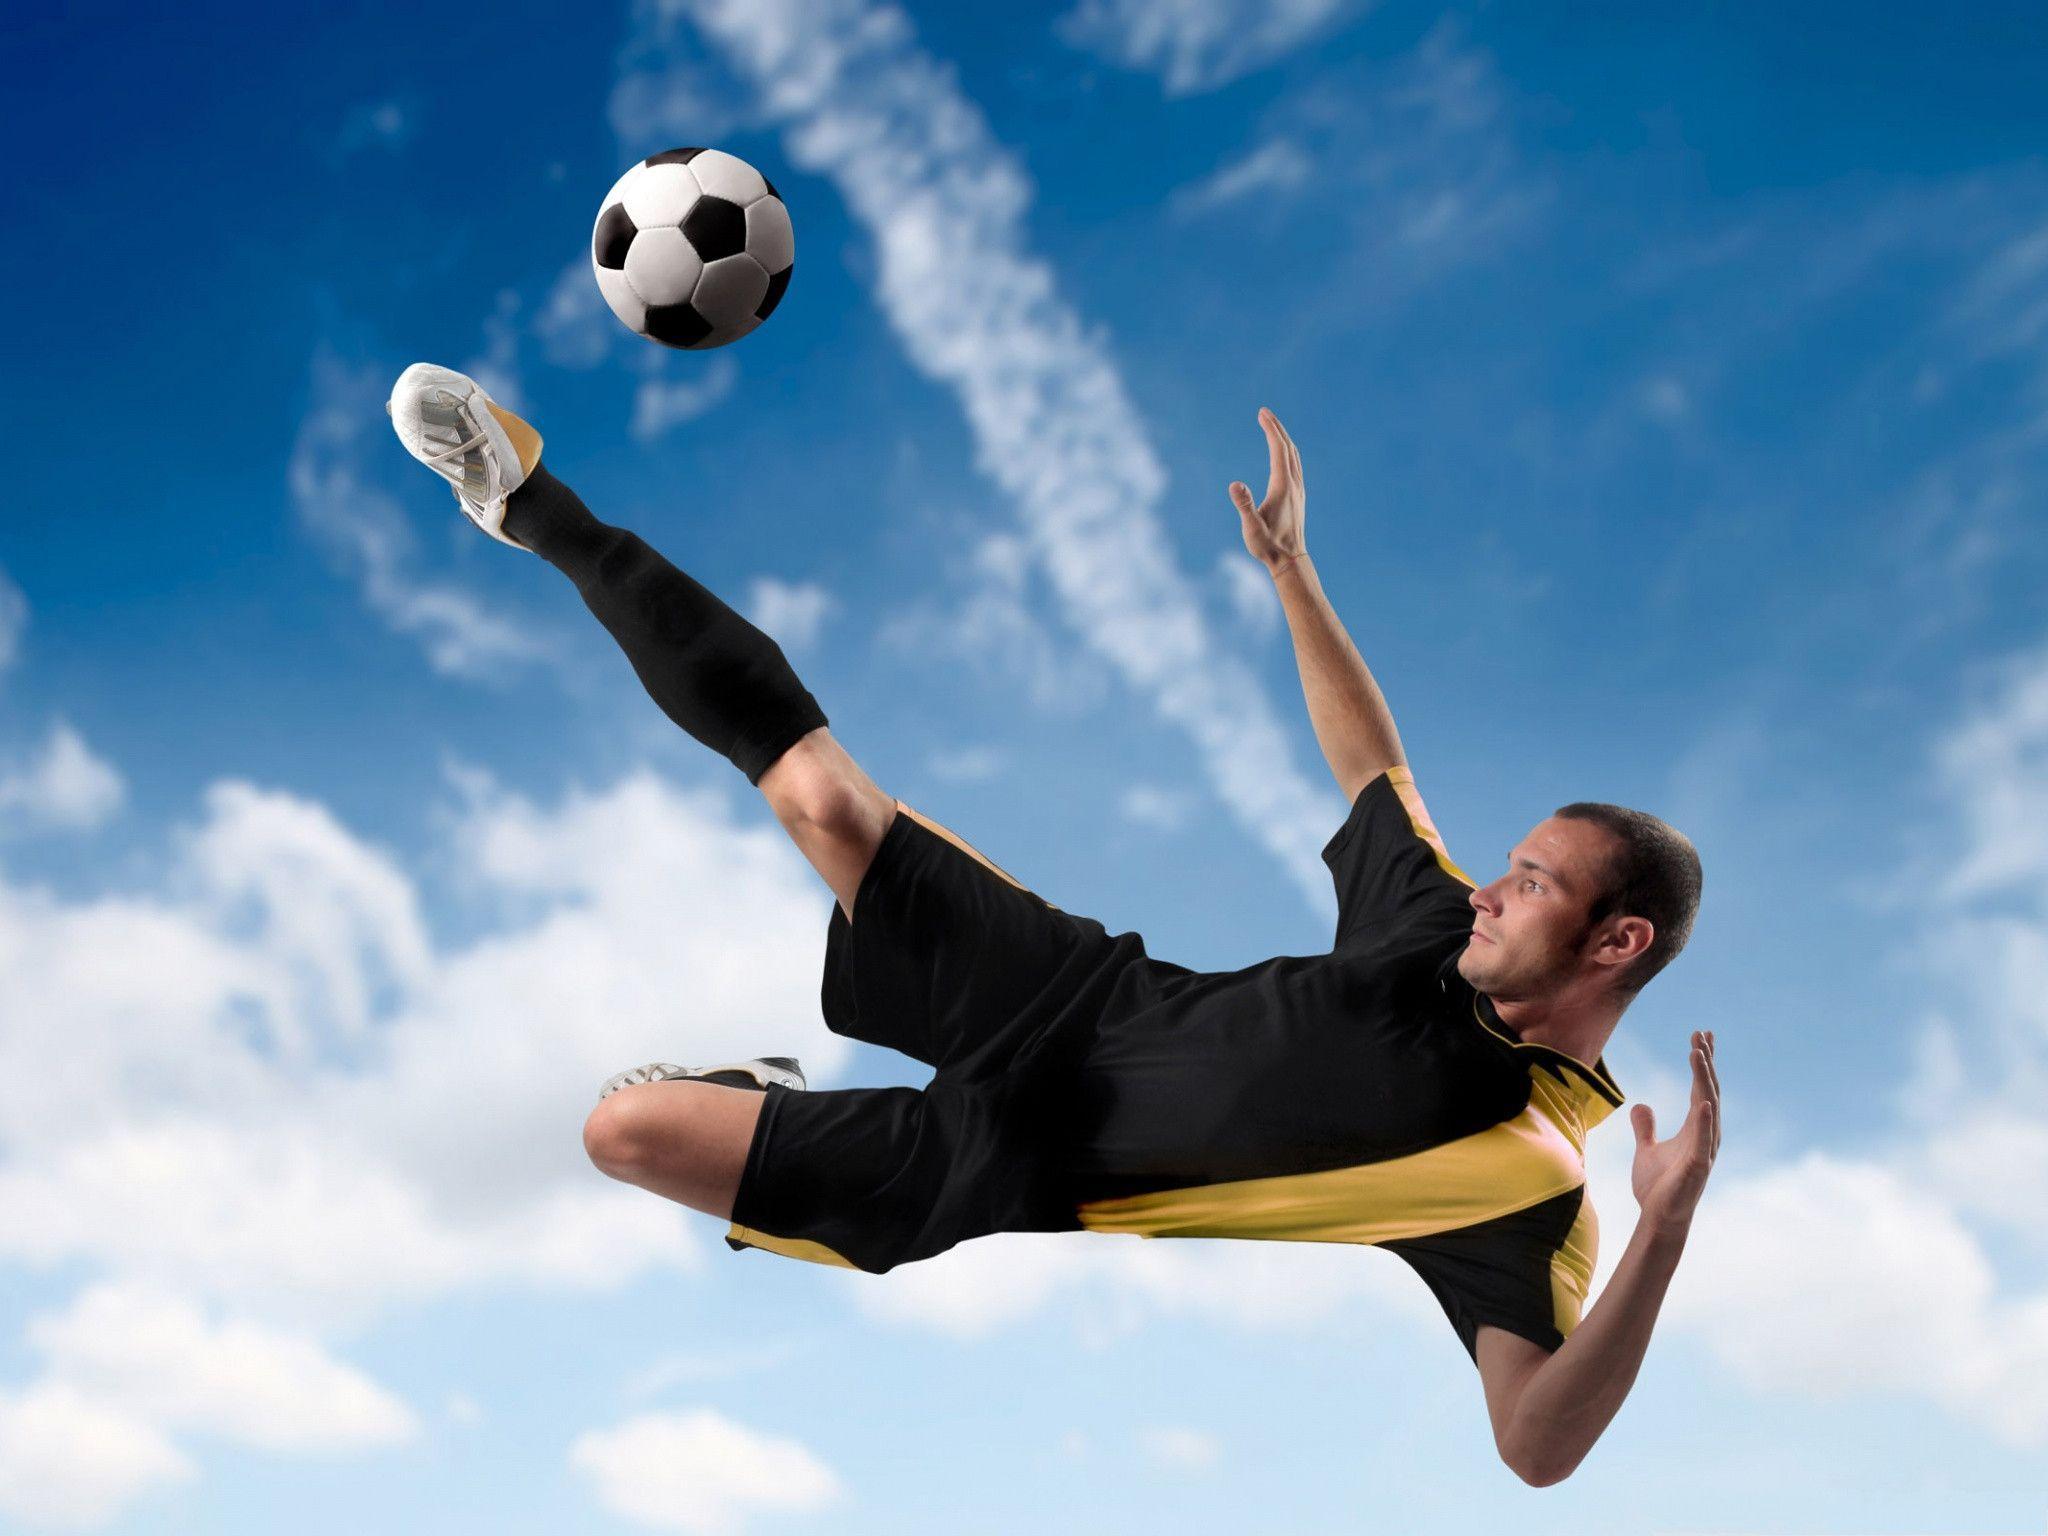 Free Sports Wallpaper, Football Player Kicking The Ball, Handsome